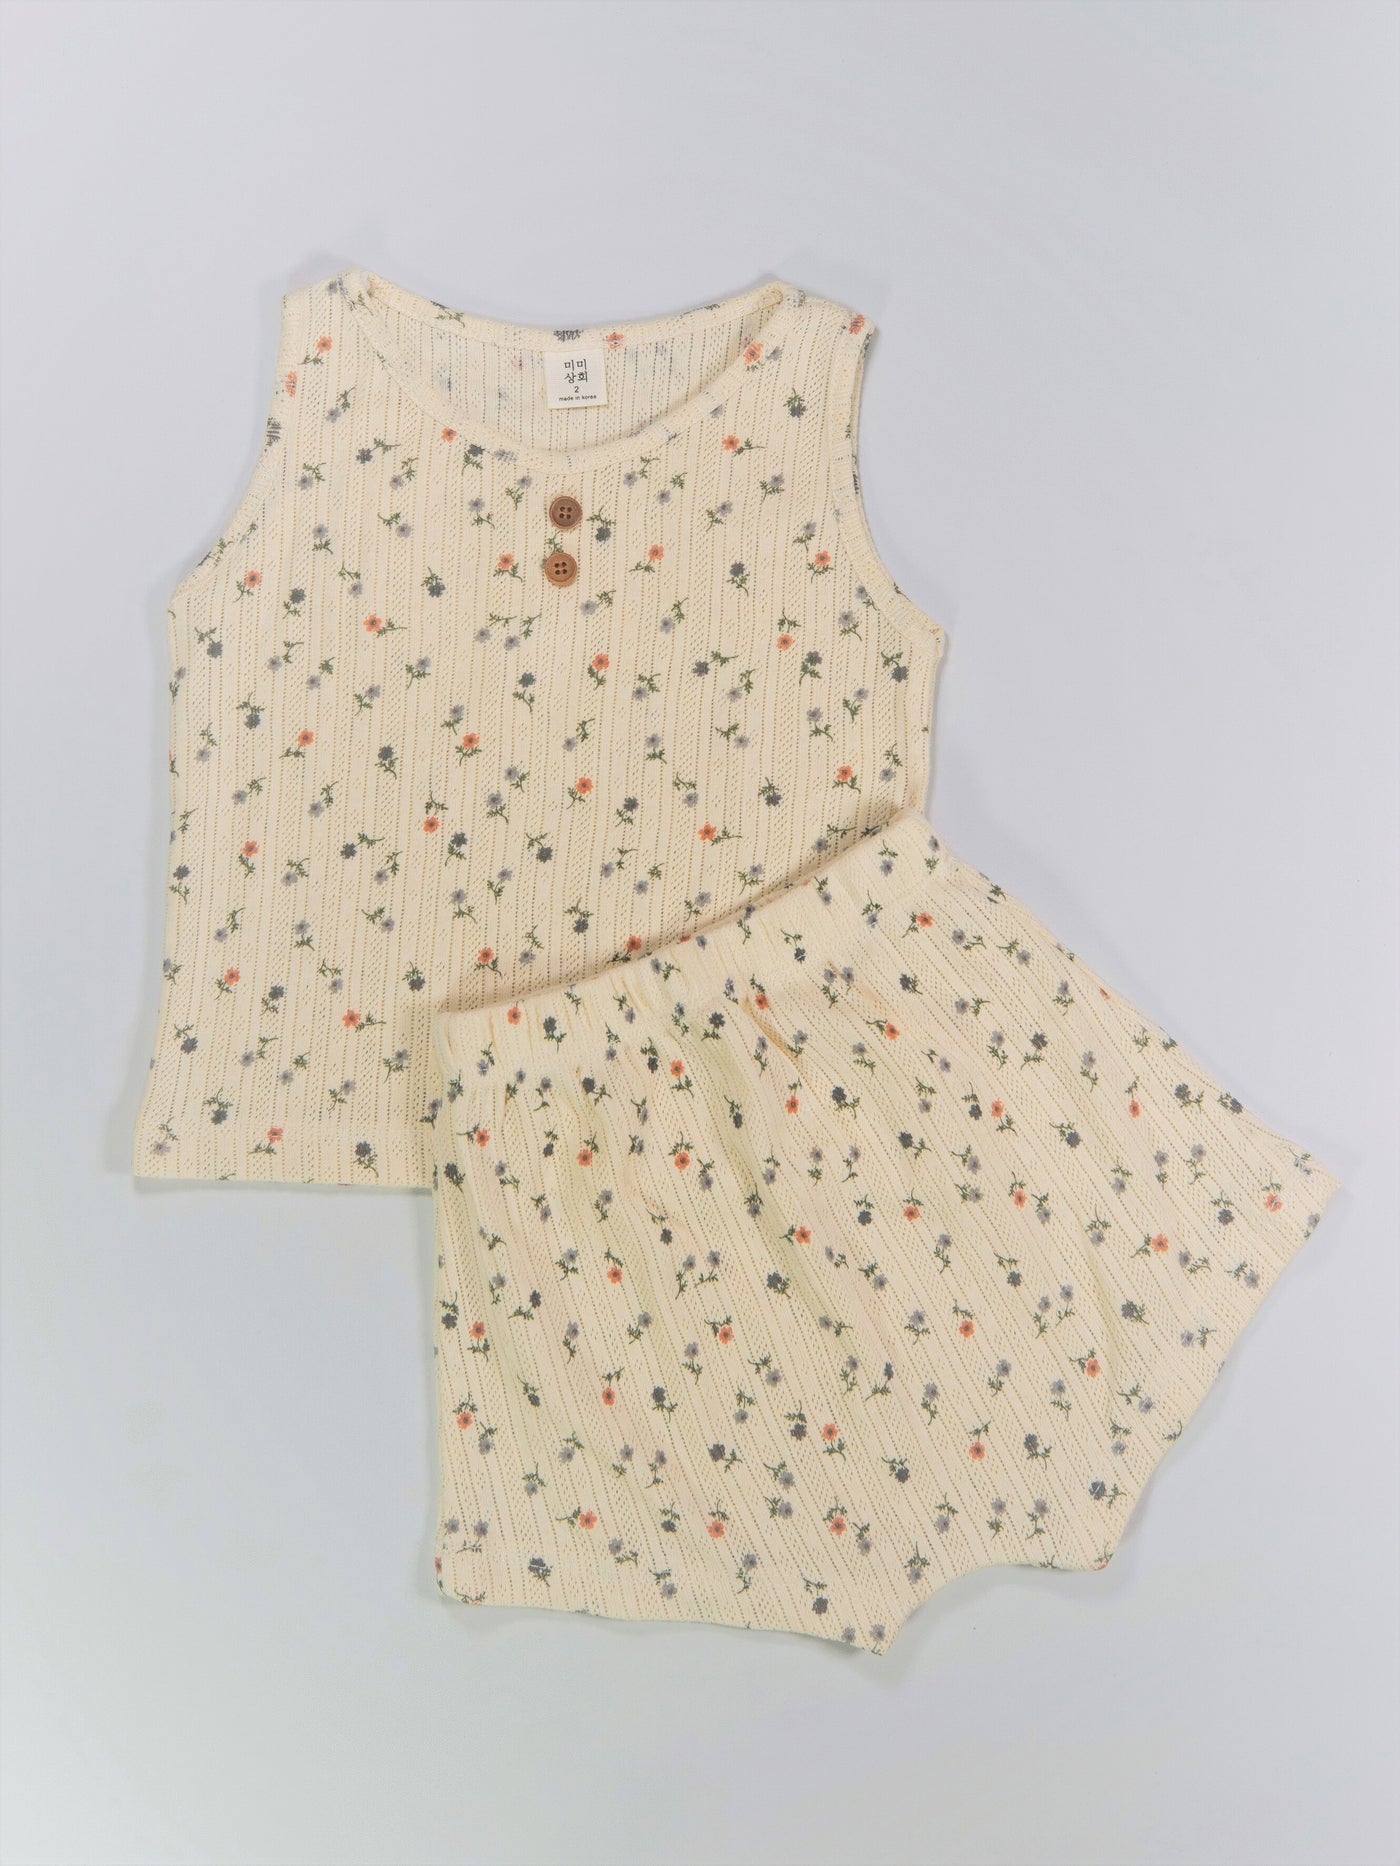 Baby girl matching set in floral prints